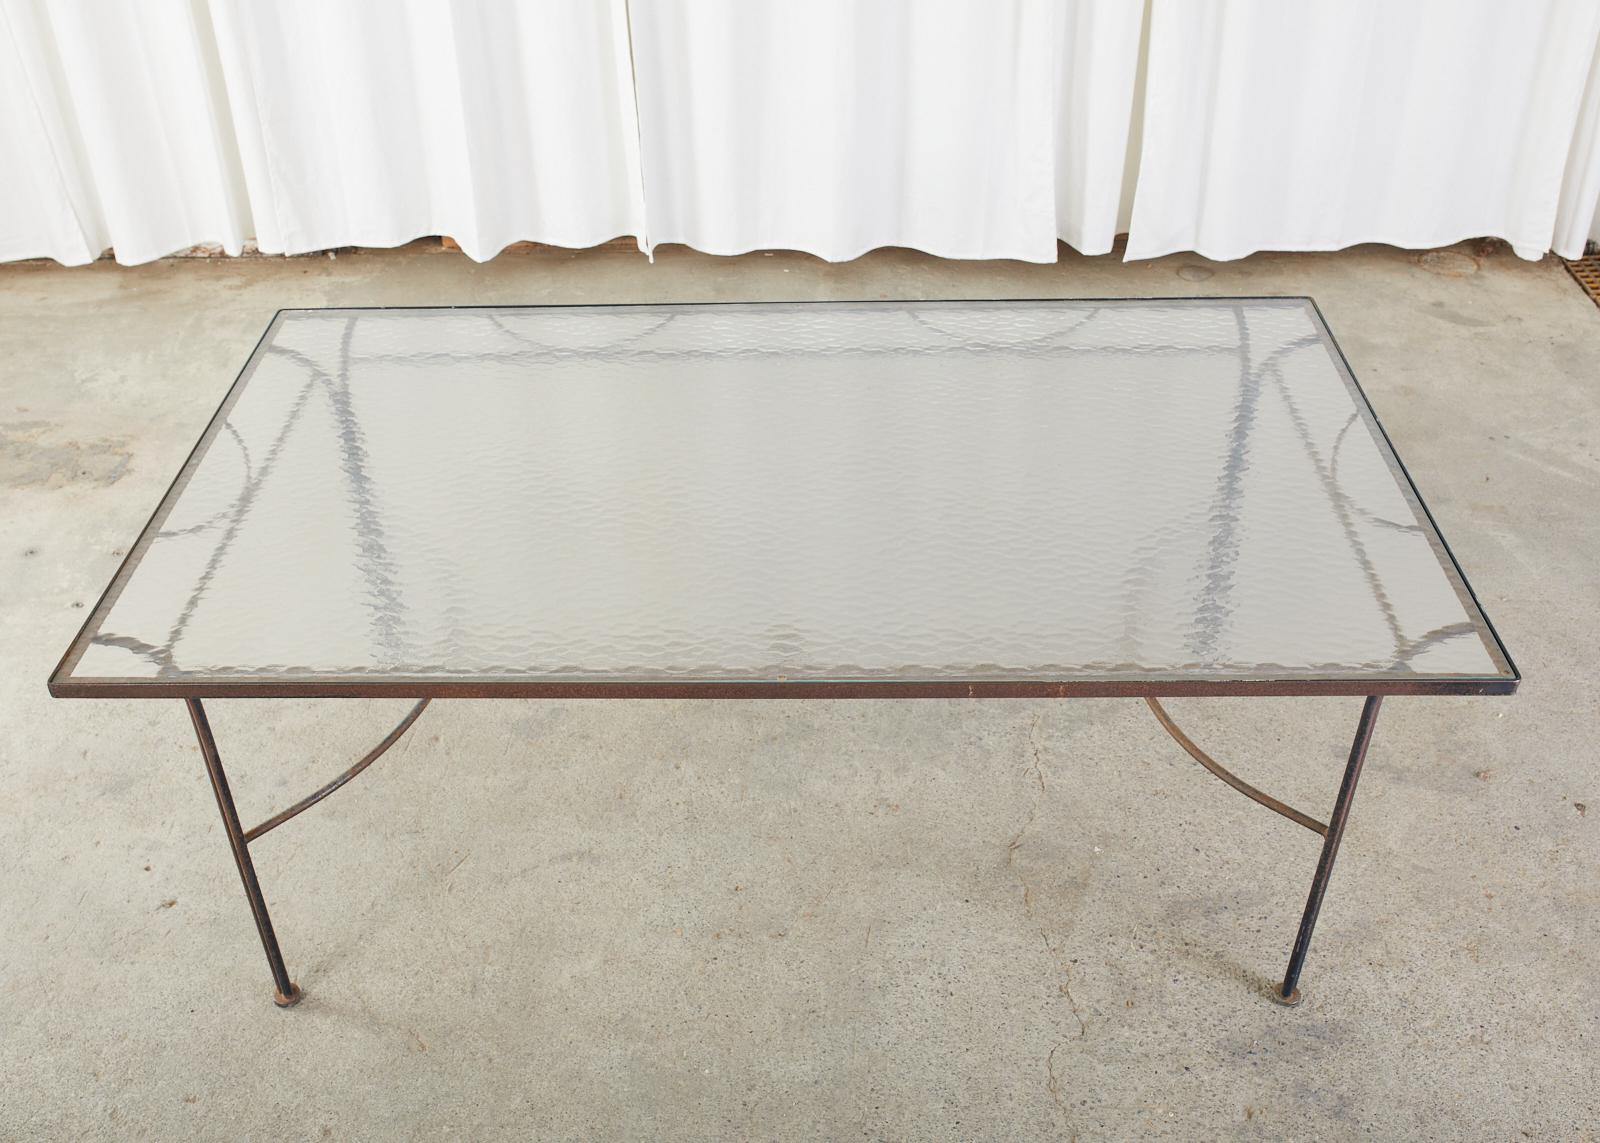 Mid-Century Modern wrought iron garden patio dining table in the manner and style of John Salterini. The table has a large frame crafted from round iron poles supporting a rectangular top inset with a frosted pane of glass. Each corner leg has two